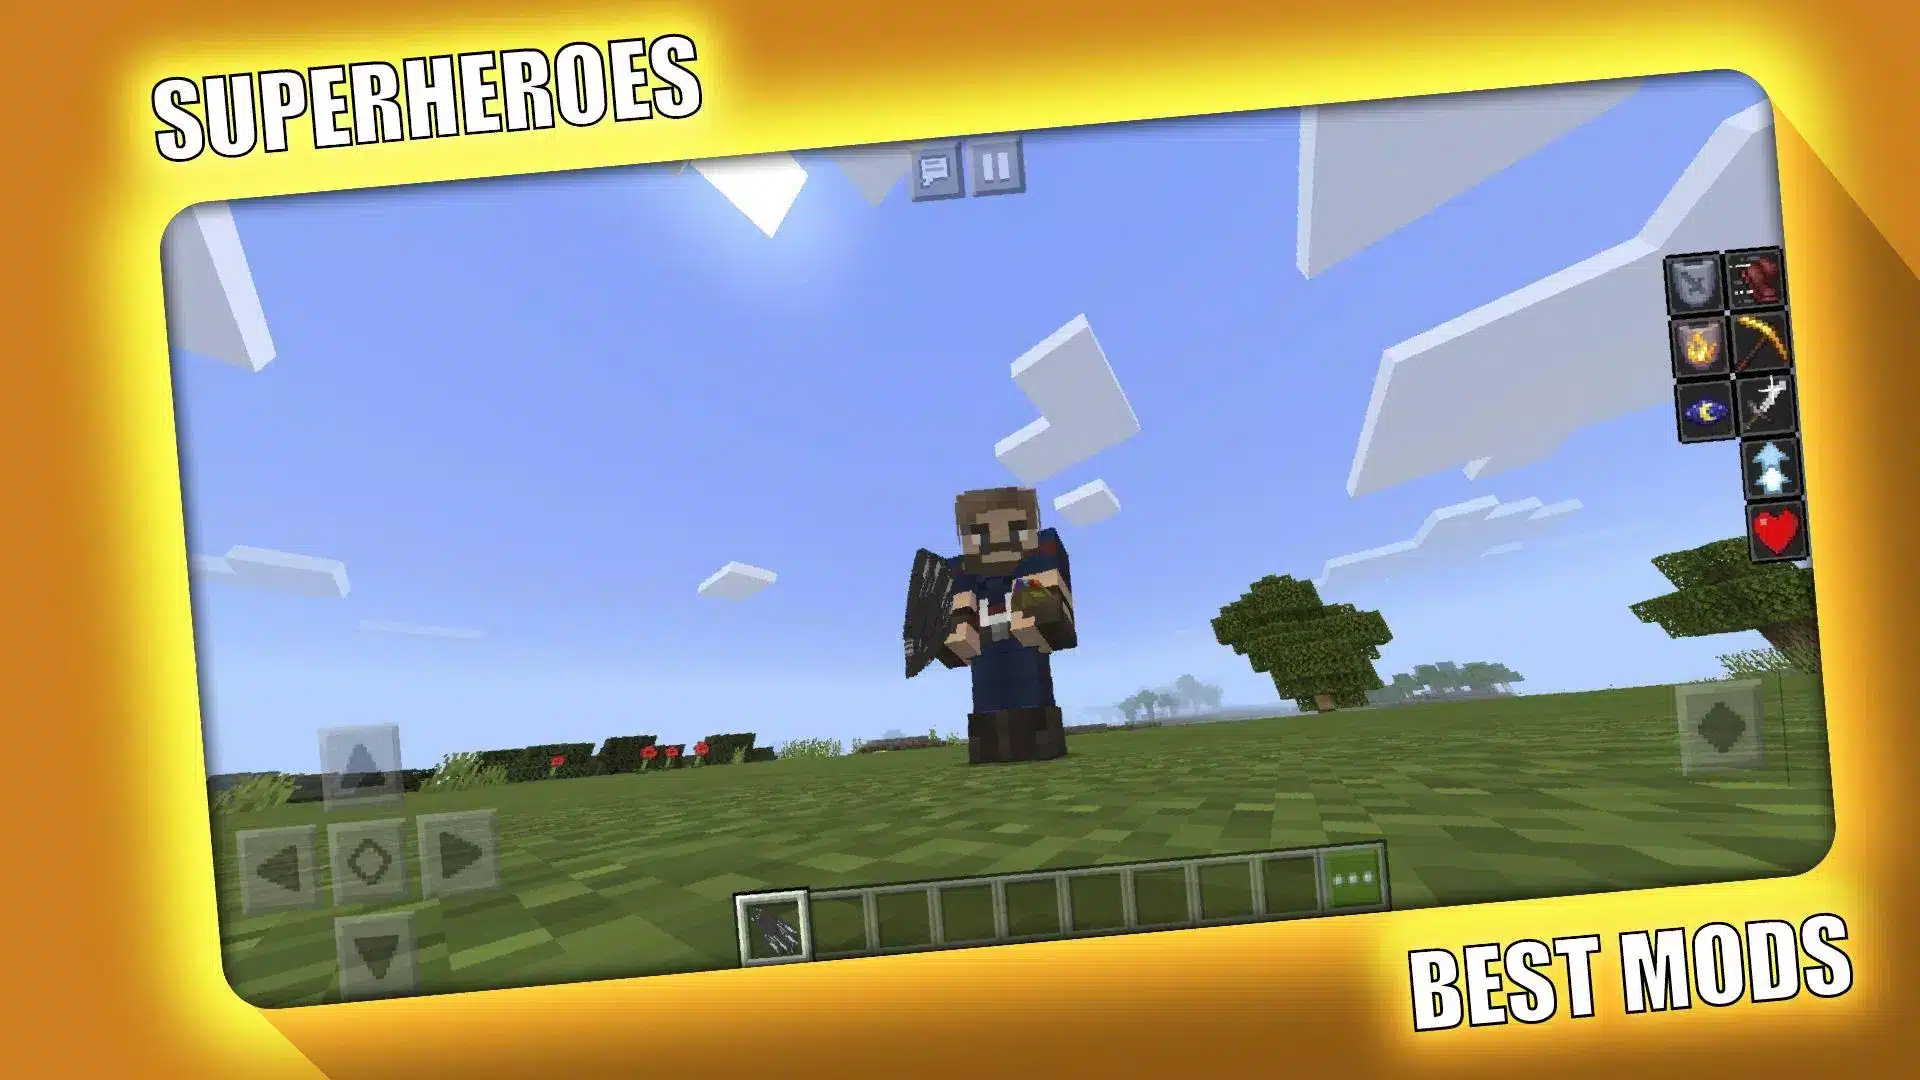 Superheroes Mod for Minecraft Image 3